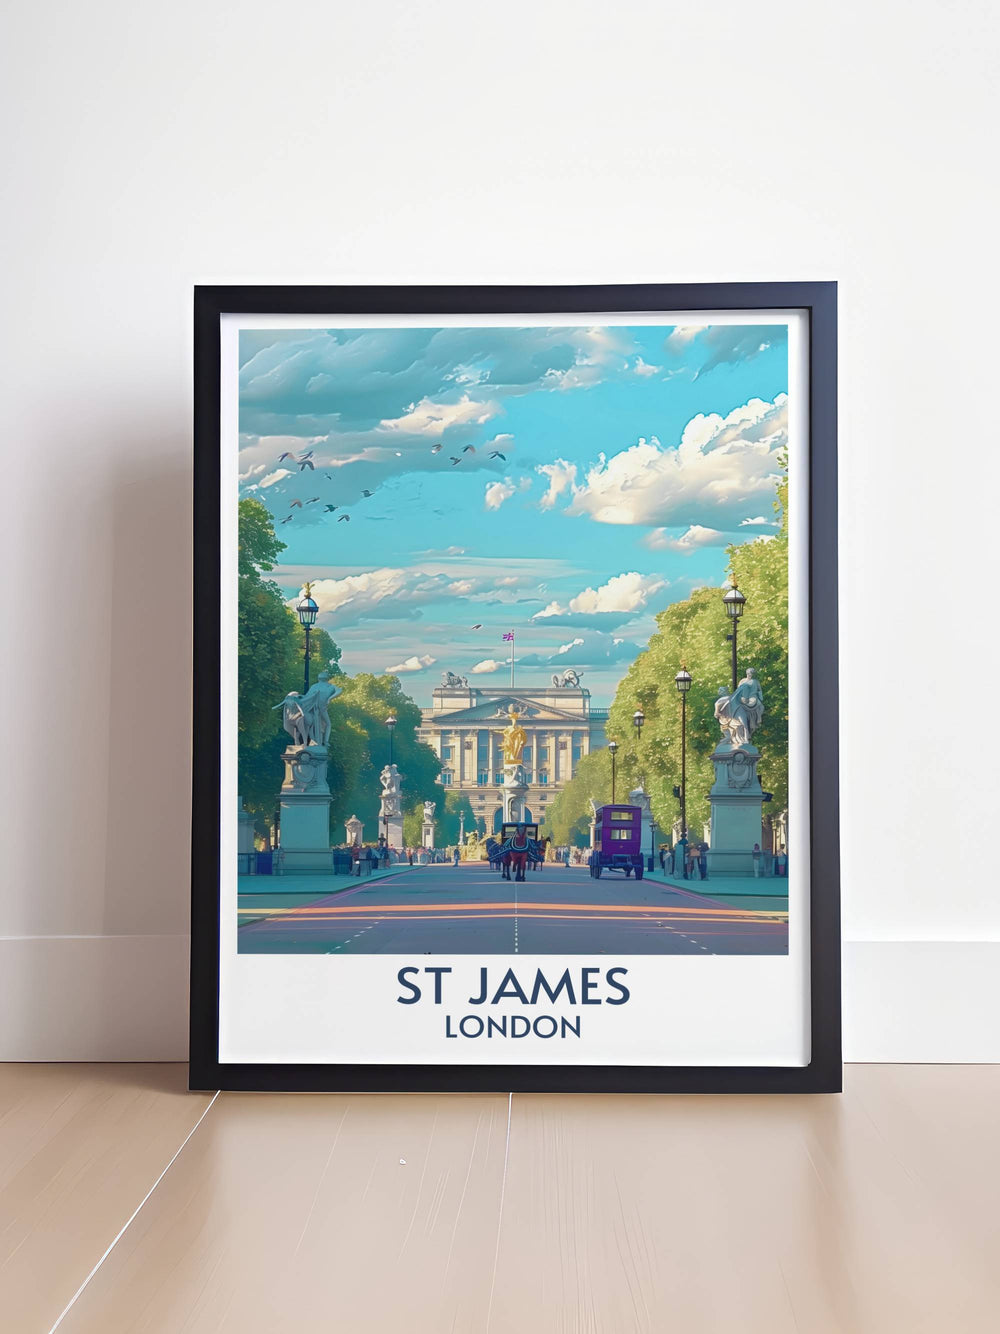 A vibrant depiction of St Jamess Park with Buckingham Palace in the background, offering a serene view of Londons historic landmarks.